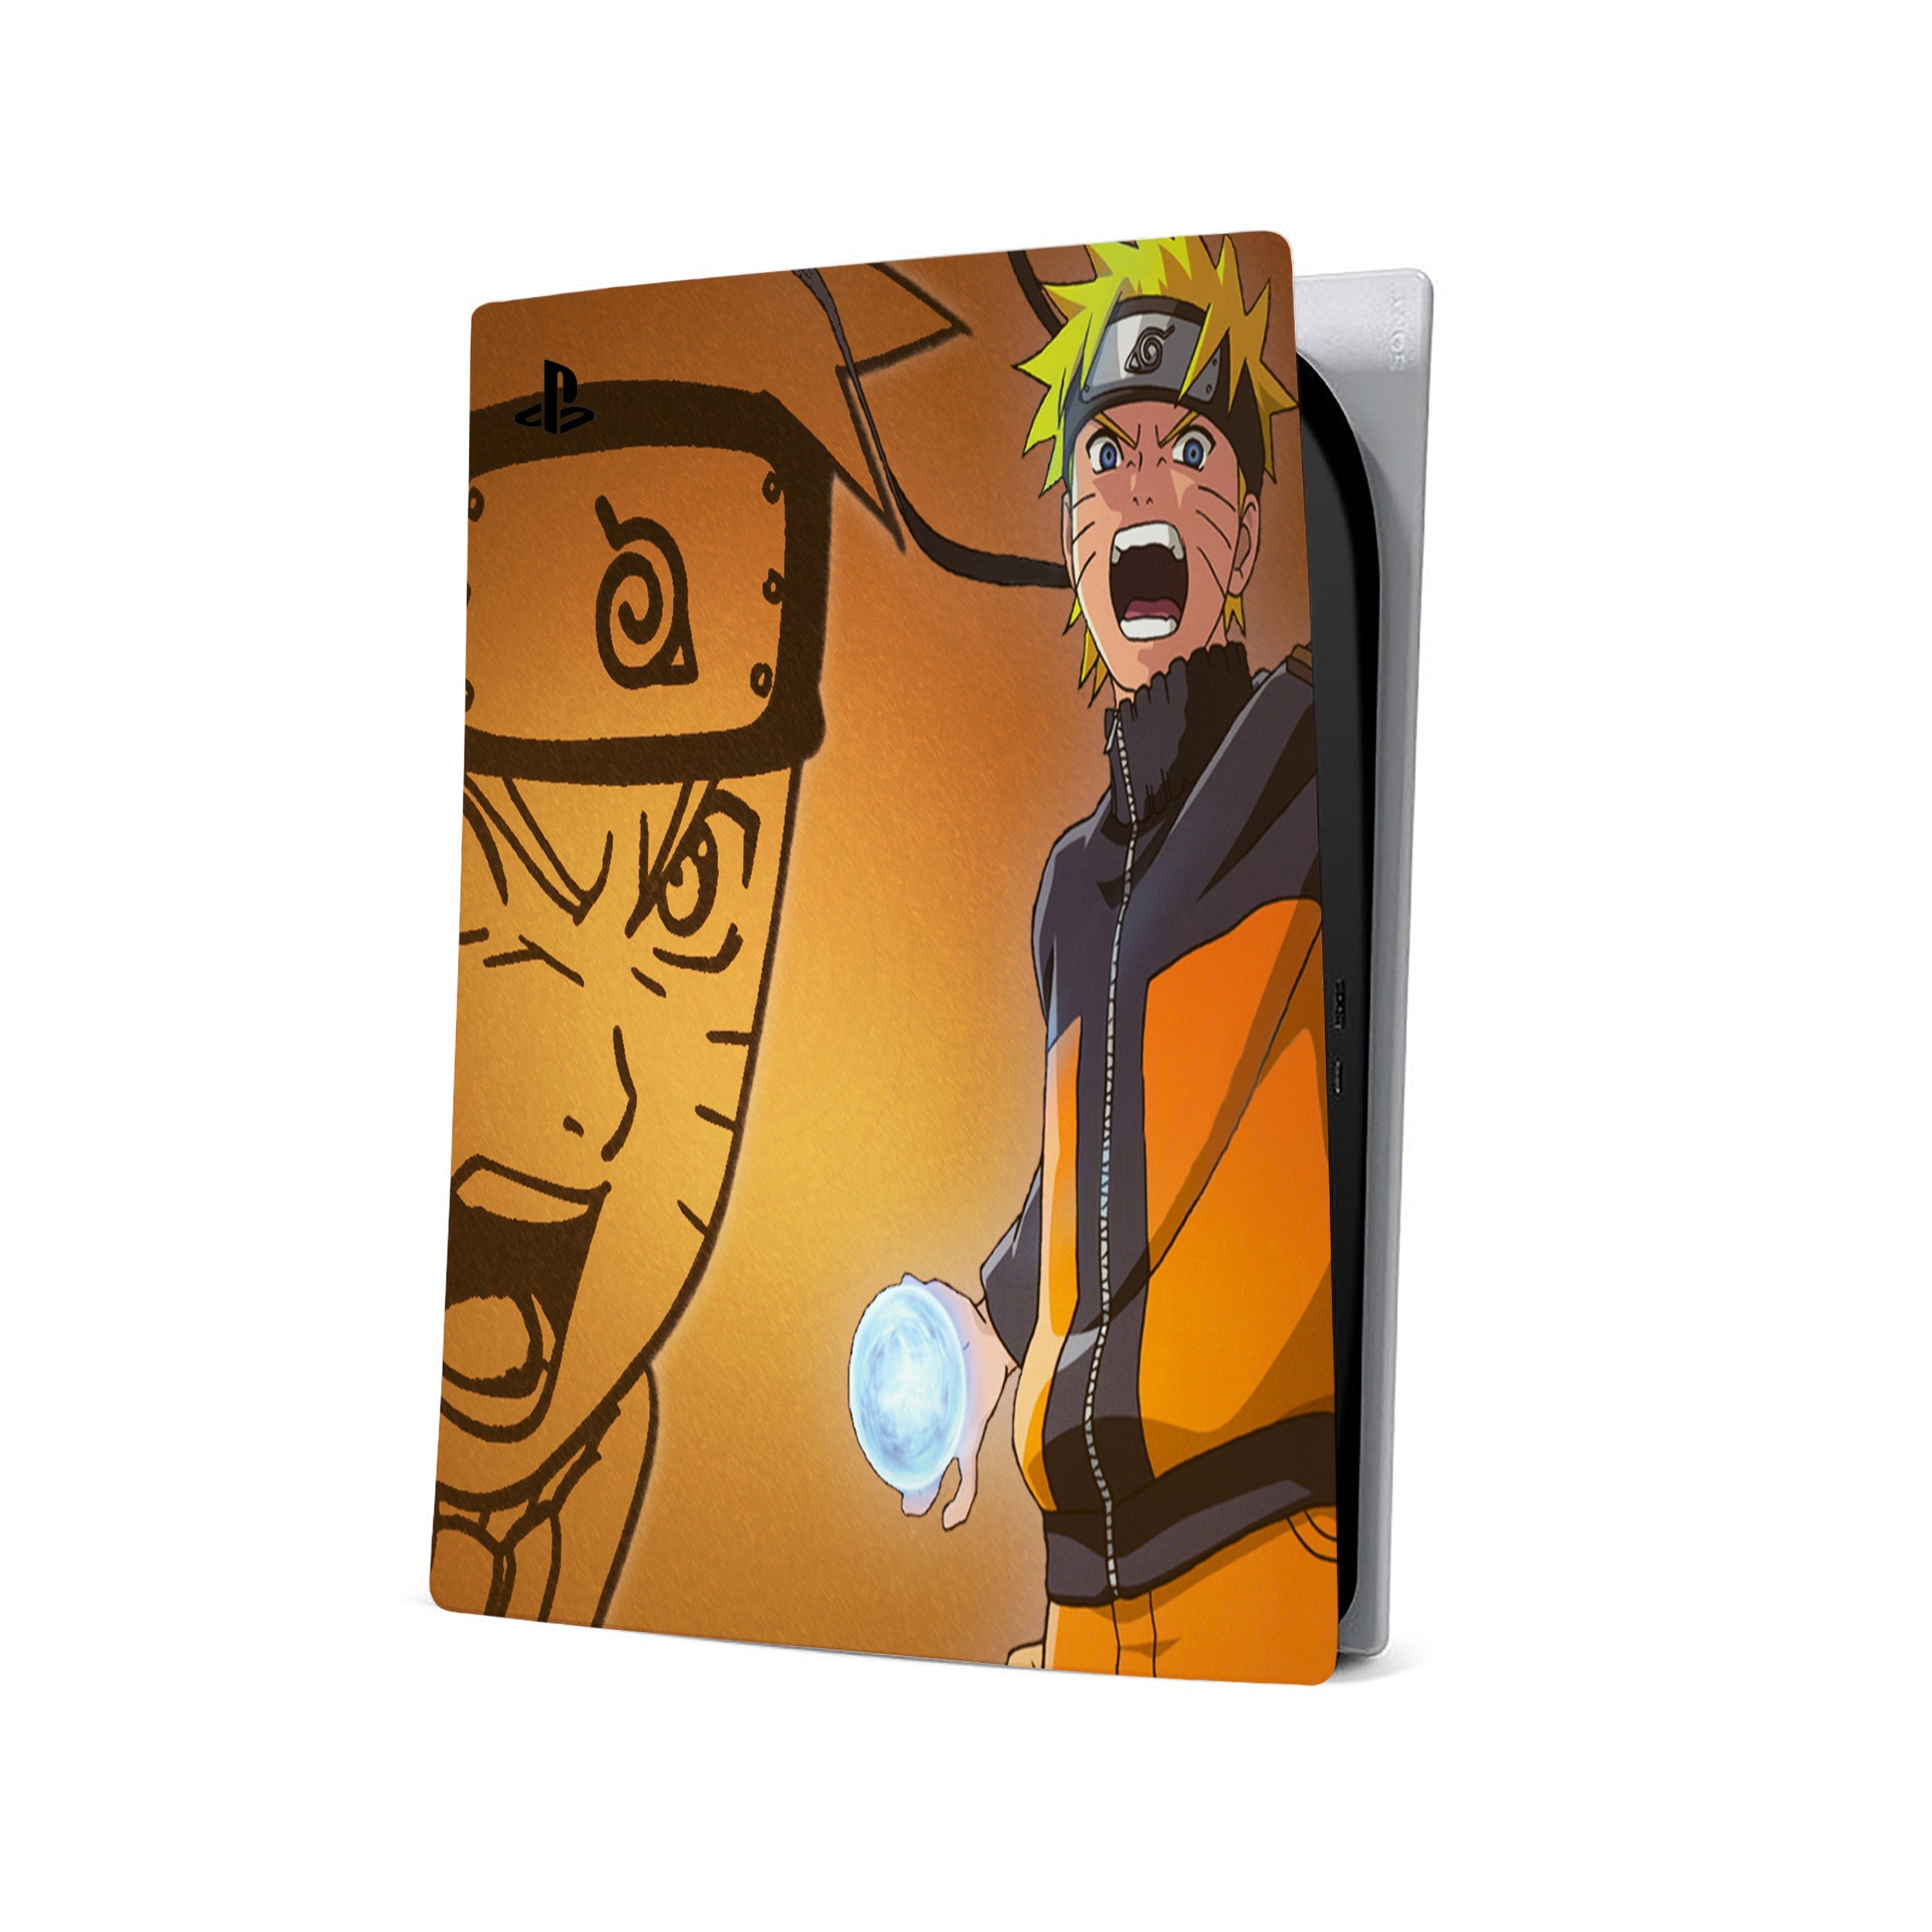 A video game skin featuring a Naruto design for the PS5.